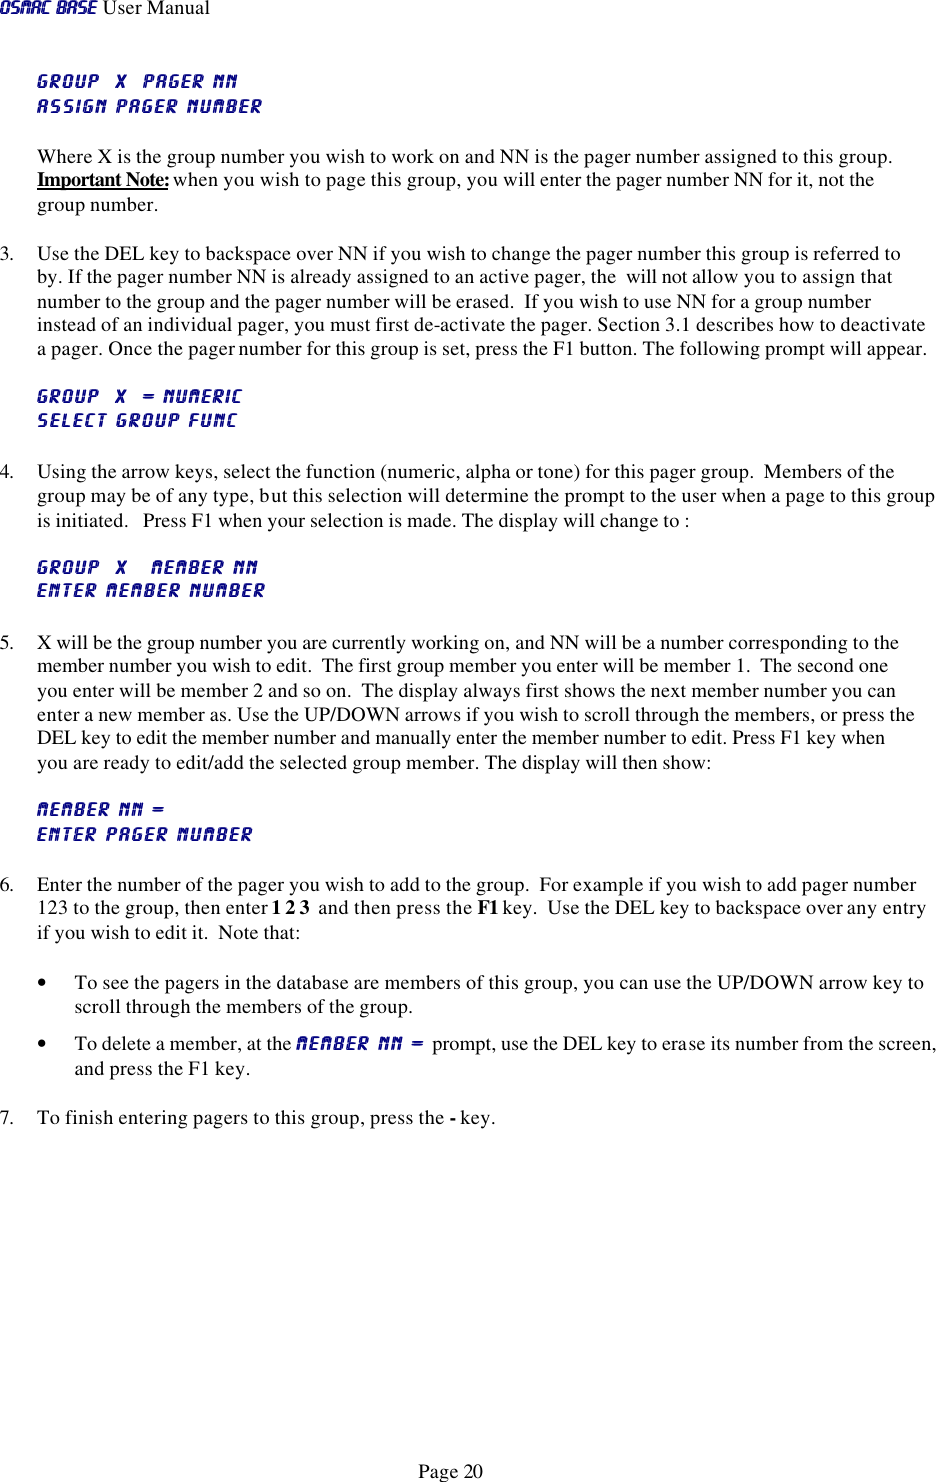 OSMAC BaseOSMAC Base User Manual      Page 20 GROUP  X  PAGER NNGROUP  X  PAGER NN  assign pager numberassign pager number  Where X is the group number you wish to work on and NN is the pager number assigned to this group.  Important Note: when you wish to page this group, you will enter the pager number NN for it, not the group number.   3. Use the DEL key to backspace over NN if you wish to change the pager number this group is referred to by. If the pager number NN is already assigned to an active pager, the  will not allow you to assign that number to the group and the pager number will be erased.  If you wish to use NN for a group number instead of an individual pager, you must first de-activate the pager. Section 3.1 describes how to deactivate a pager. Once the pager number for this group is set, press the F1 button. The following prompt will appear. GROUP  X  = numericGROUP  X  = numeric   SELECT GROUP FUNCSELECT GROUP FUNC 4. Using the arrow keys, select the function (numeric, alpha or tone) for this pager group.  Members of the group may be of any type, but this selection will determine the prompt to the user when a page to this group is initiated.   Press F1 when your selection is made. The display will change to : GROUP  X   MEMBER NNGROUP  X   MEMBER NN  ENTER MEMBER NUMBERENTER MEMBER NUMBER 5. X will be the group number you are currently working on, and NN will be a number corresponding to the member number you wish to edit.  The first group member you enter will be member 1.  The second one you enter will be member 2 and so on.  The display always first shows the next member number you can enter a new member as. Use the UP/DOWN arrows if you wish to scroll through the members, or press the DEL key to edit the member number and manually enter the member number to edit. Press F1 key when you are ready to edit/add the selected group member. The display will then show: MEMBER NN = MEMBER NN =   ENTER PAGER NUMBERENTER PAGER NUMBER 6. Enter the number of the pager you wish to add to the group.  For example if you wish to add pager number 123 to the group, then enter 1 2 3  and then press the F1 key.  Use the DEL key to backspace over any entry if you wish to edit it.  Note that: • To see the pagers in the database are members of this group, you can use the UP/DOWN arrow key to scroll through the members of the group.  • To delete a member, at the MEMBER NN = MEMBER NN = prompt, use the DEL key to erase its number from the screen, and press the F1 key.  7. To finish entering pagers to this group, press the - key. 